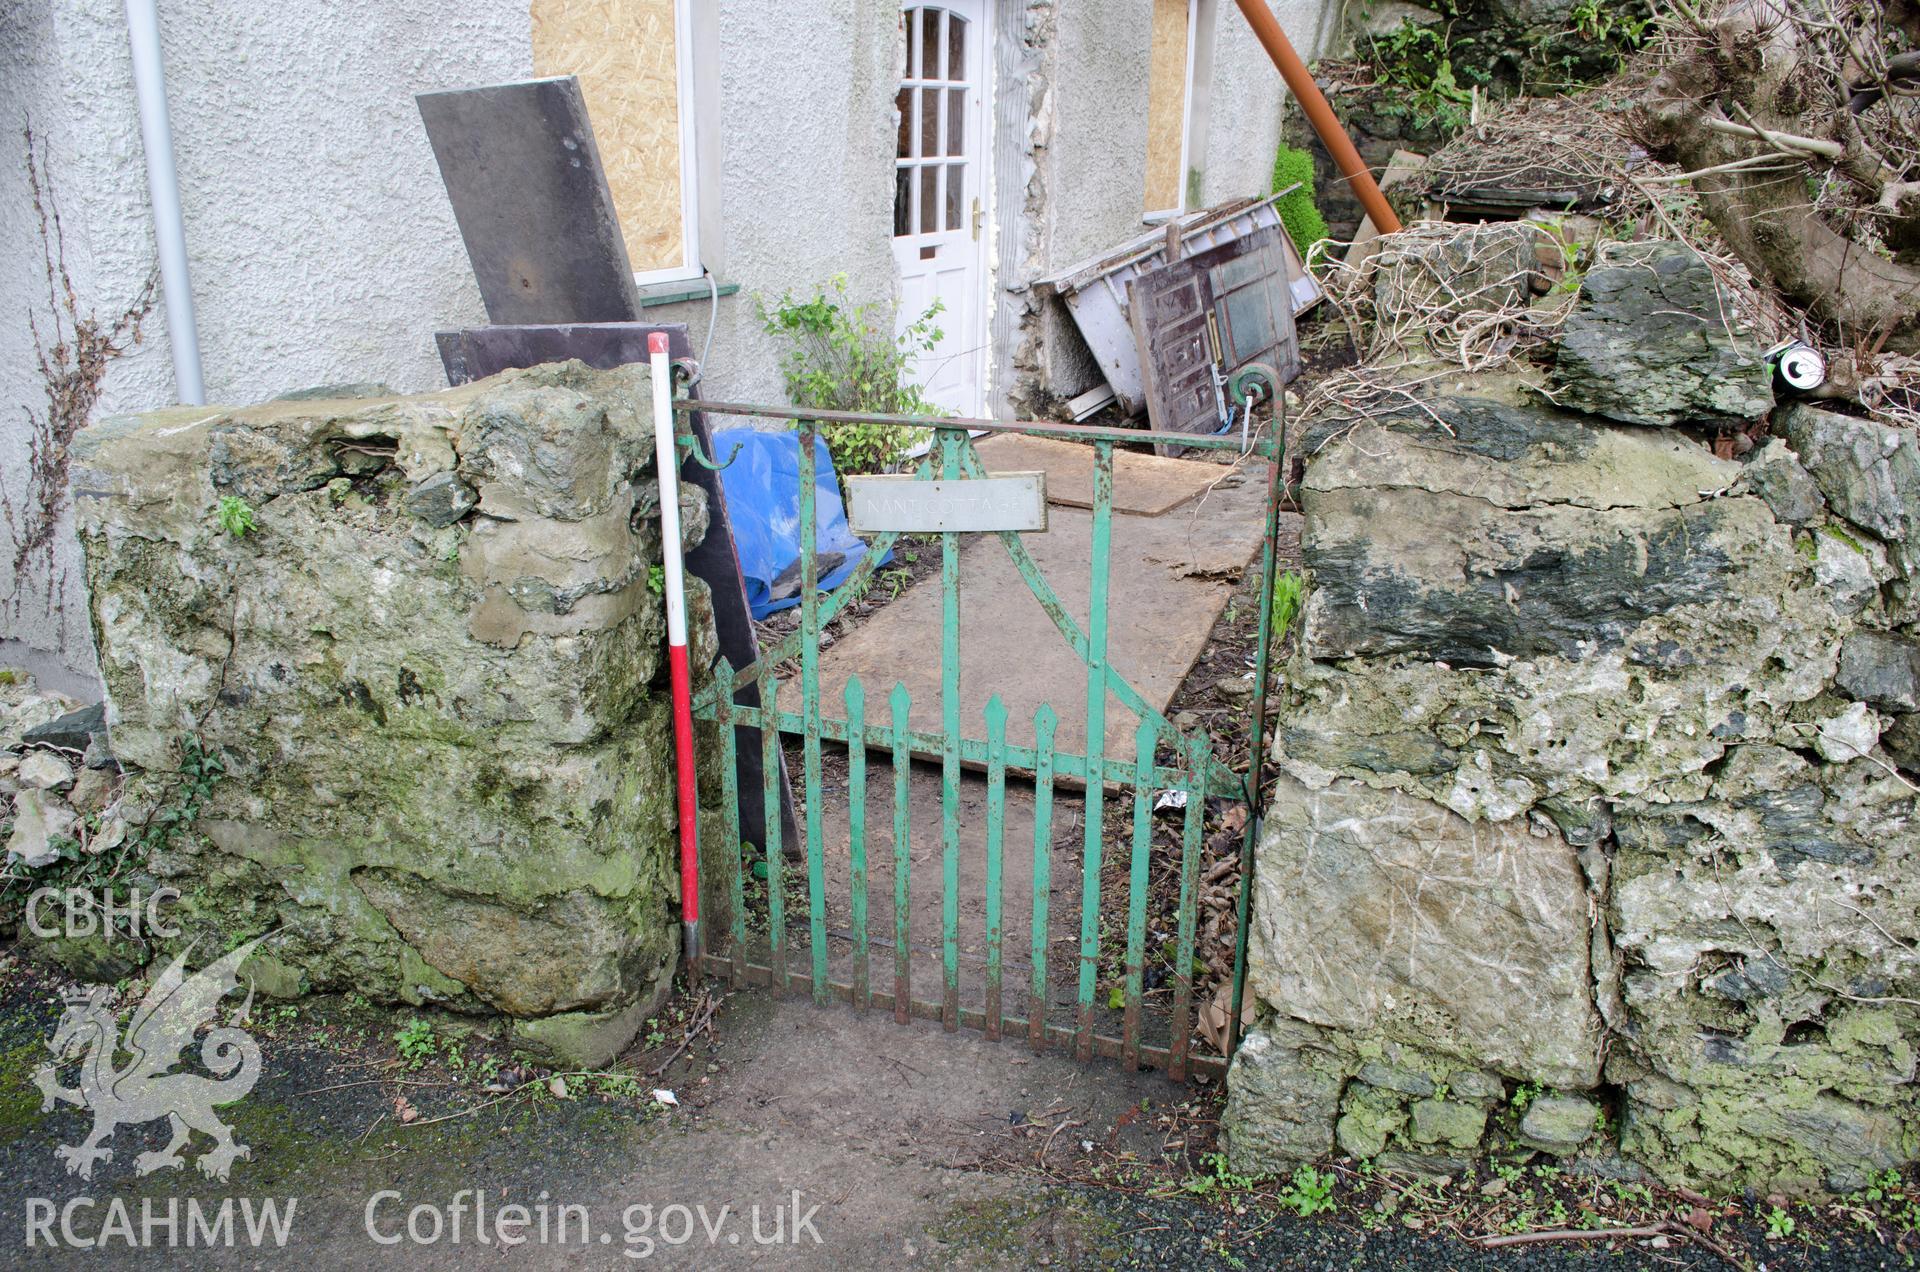 View from the south showing cast iron gate and wall for entrance into cottage garden.